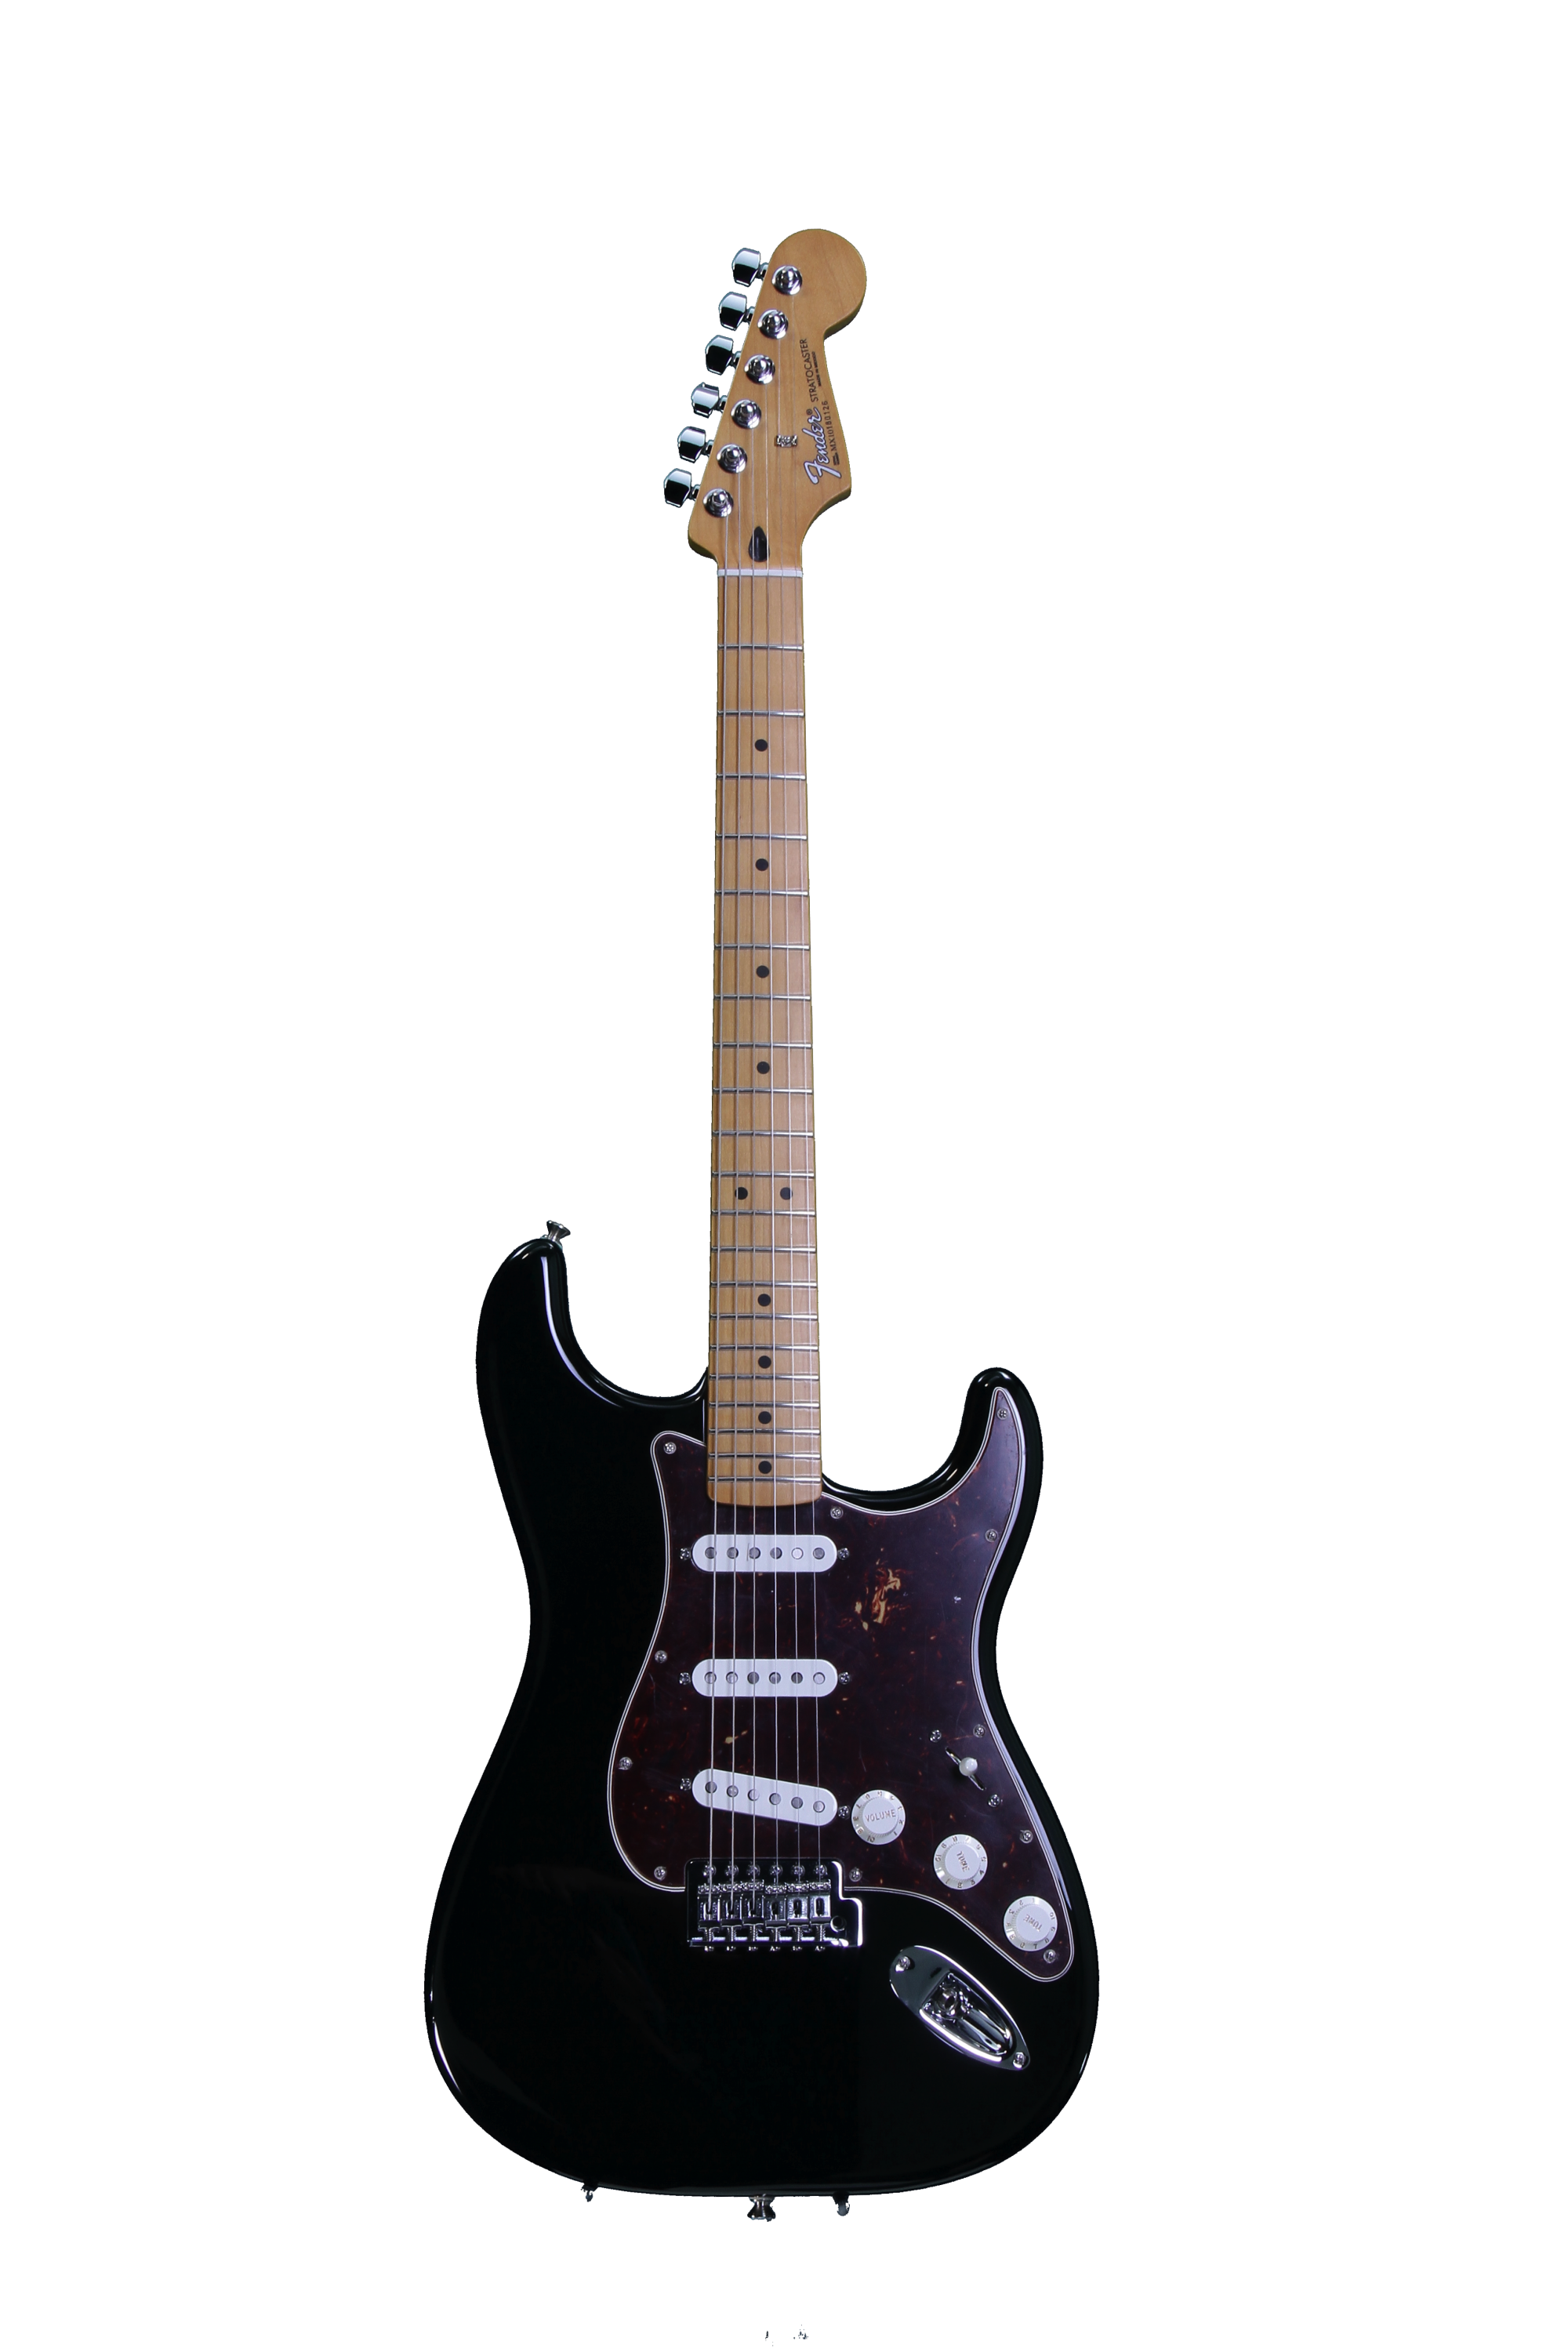 Roadhouse　Deluxe　Black　Sweetwater　Fender　Stratocaster